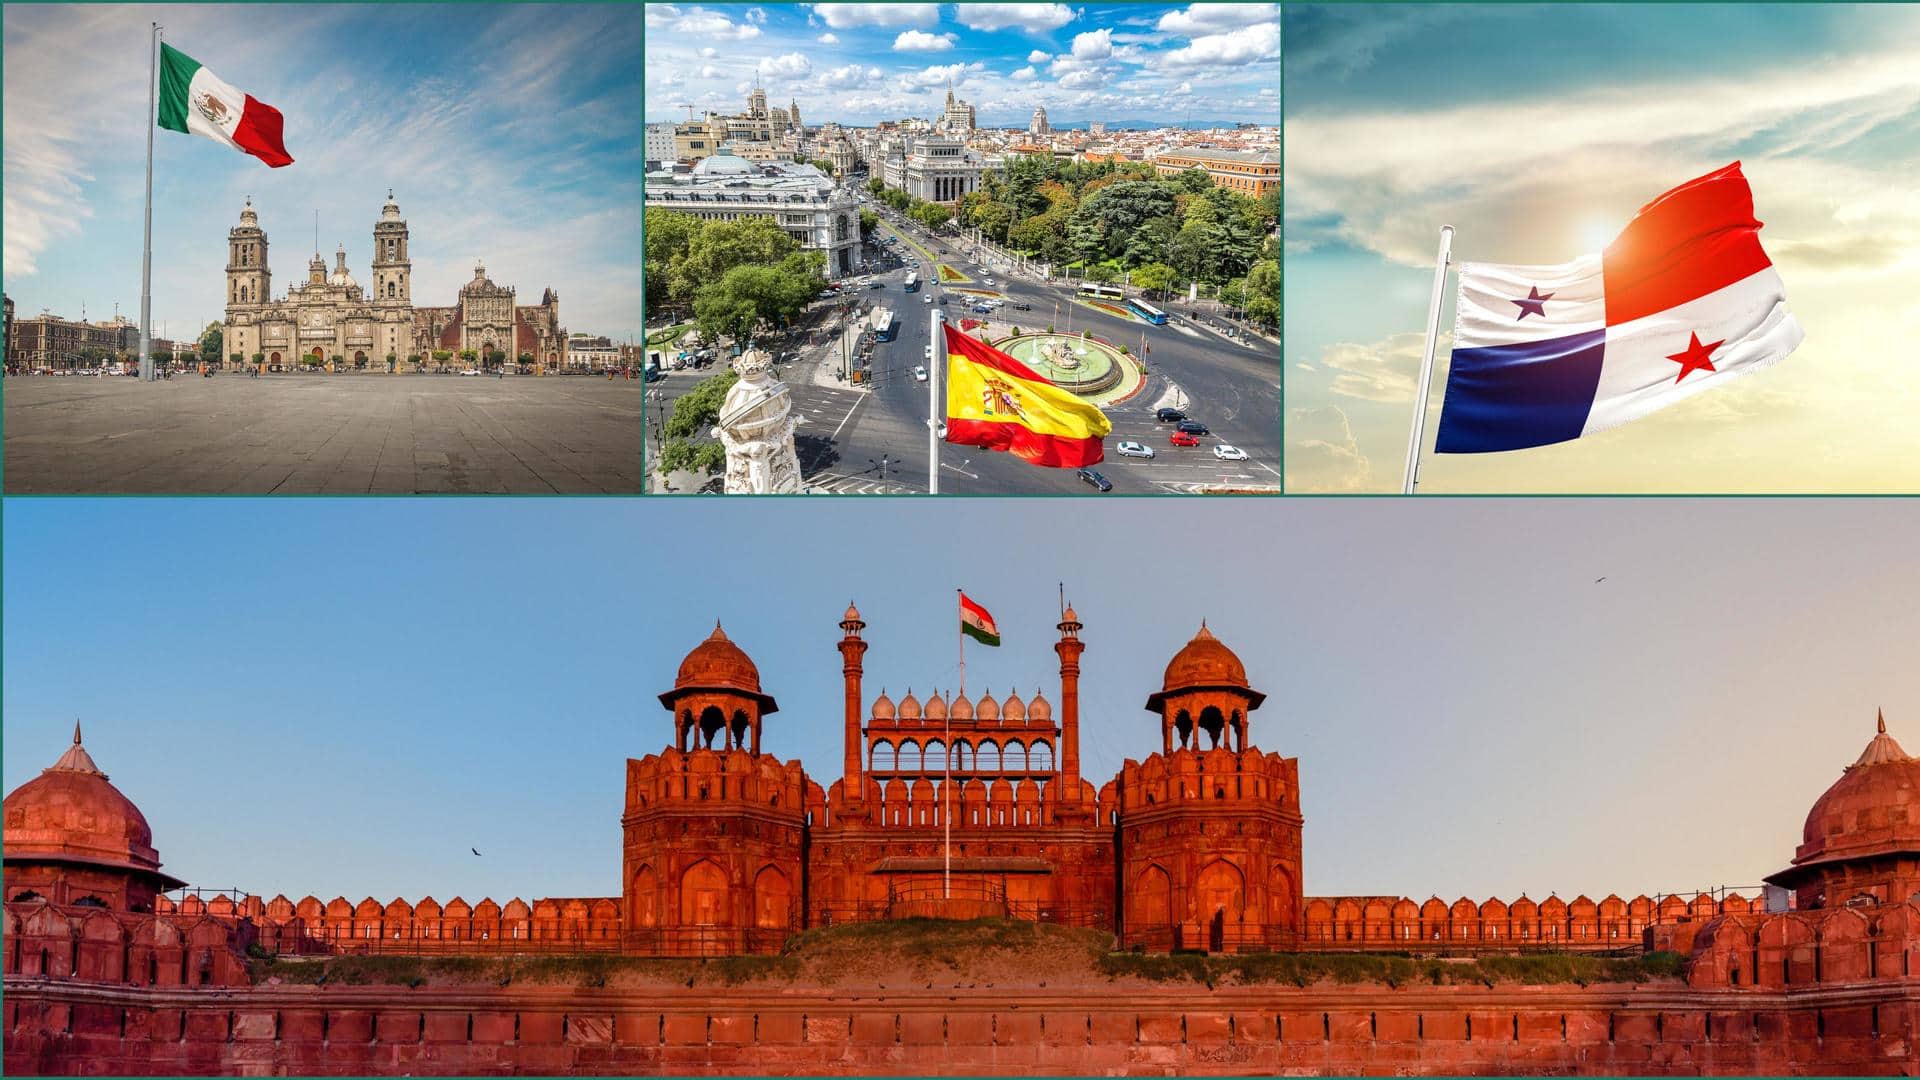 India not even in top 30 among expats' preferred destinations